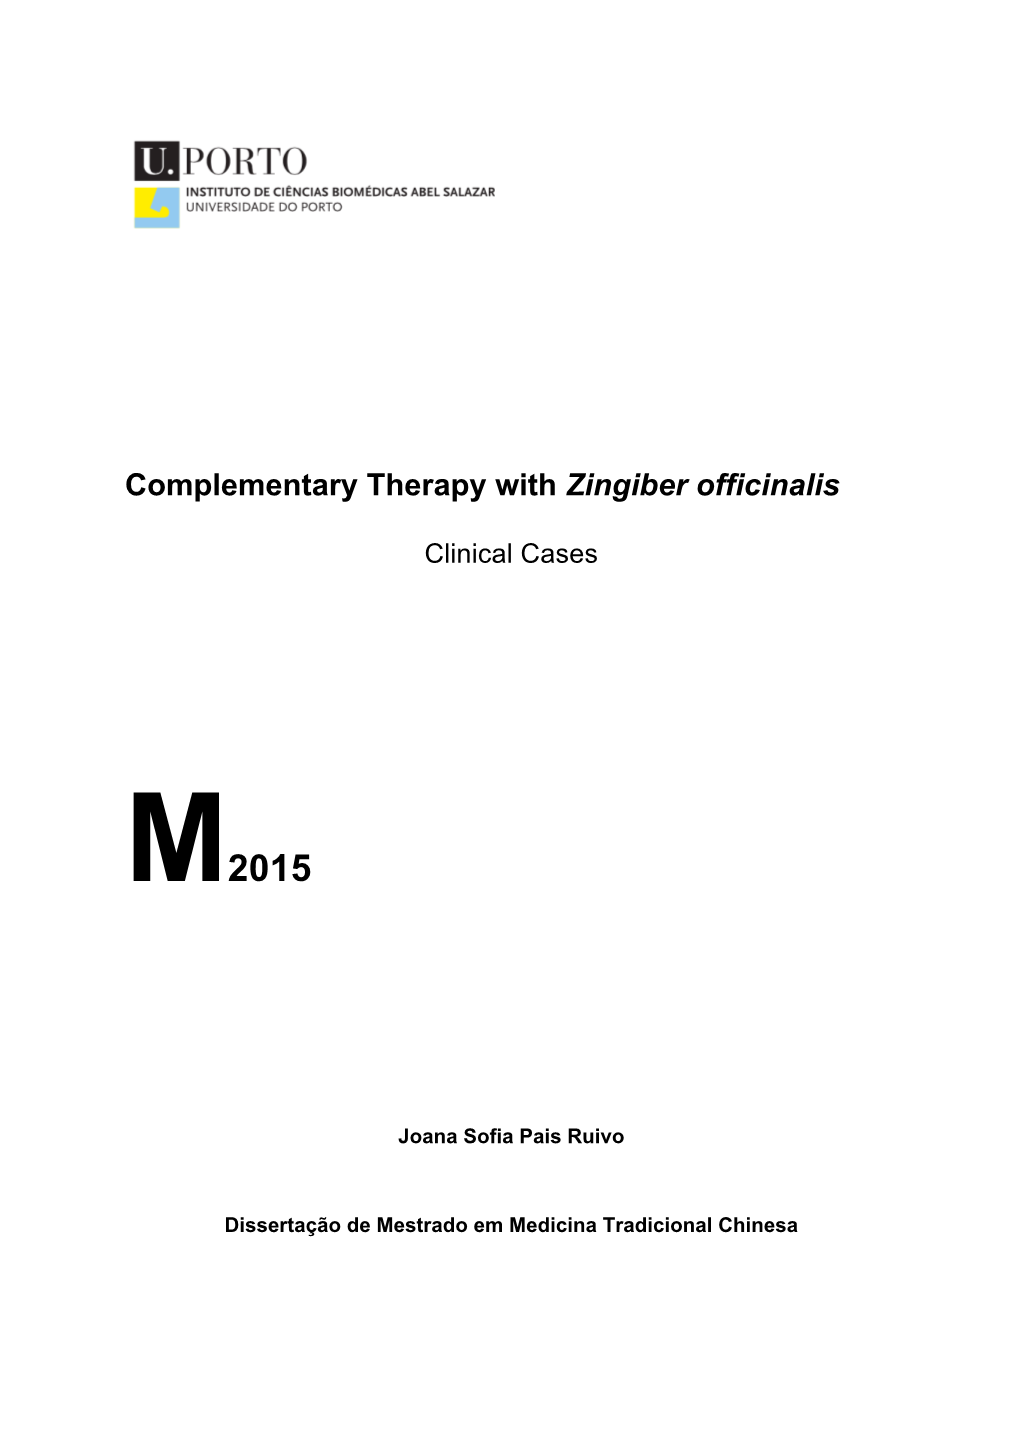 Complementary Therapy with Zingiber Officinalis